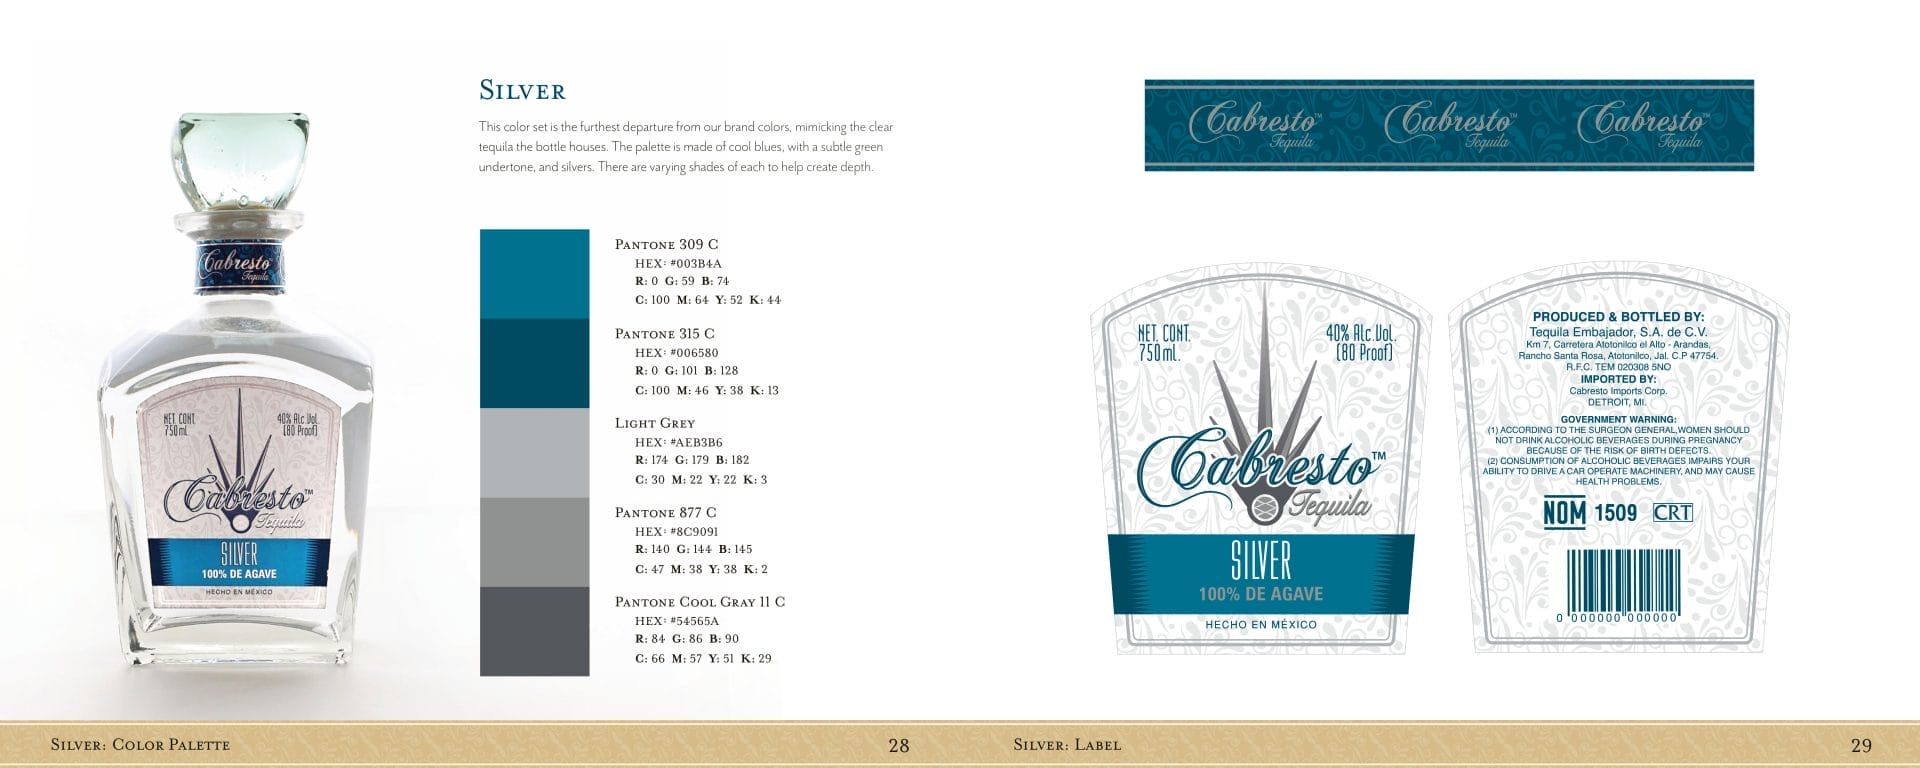 Tequila Cabresto brand book final spread, featuring color palette for each product. Created by Perfect Afternoon.